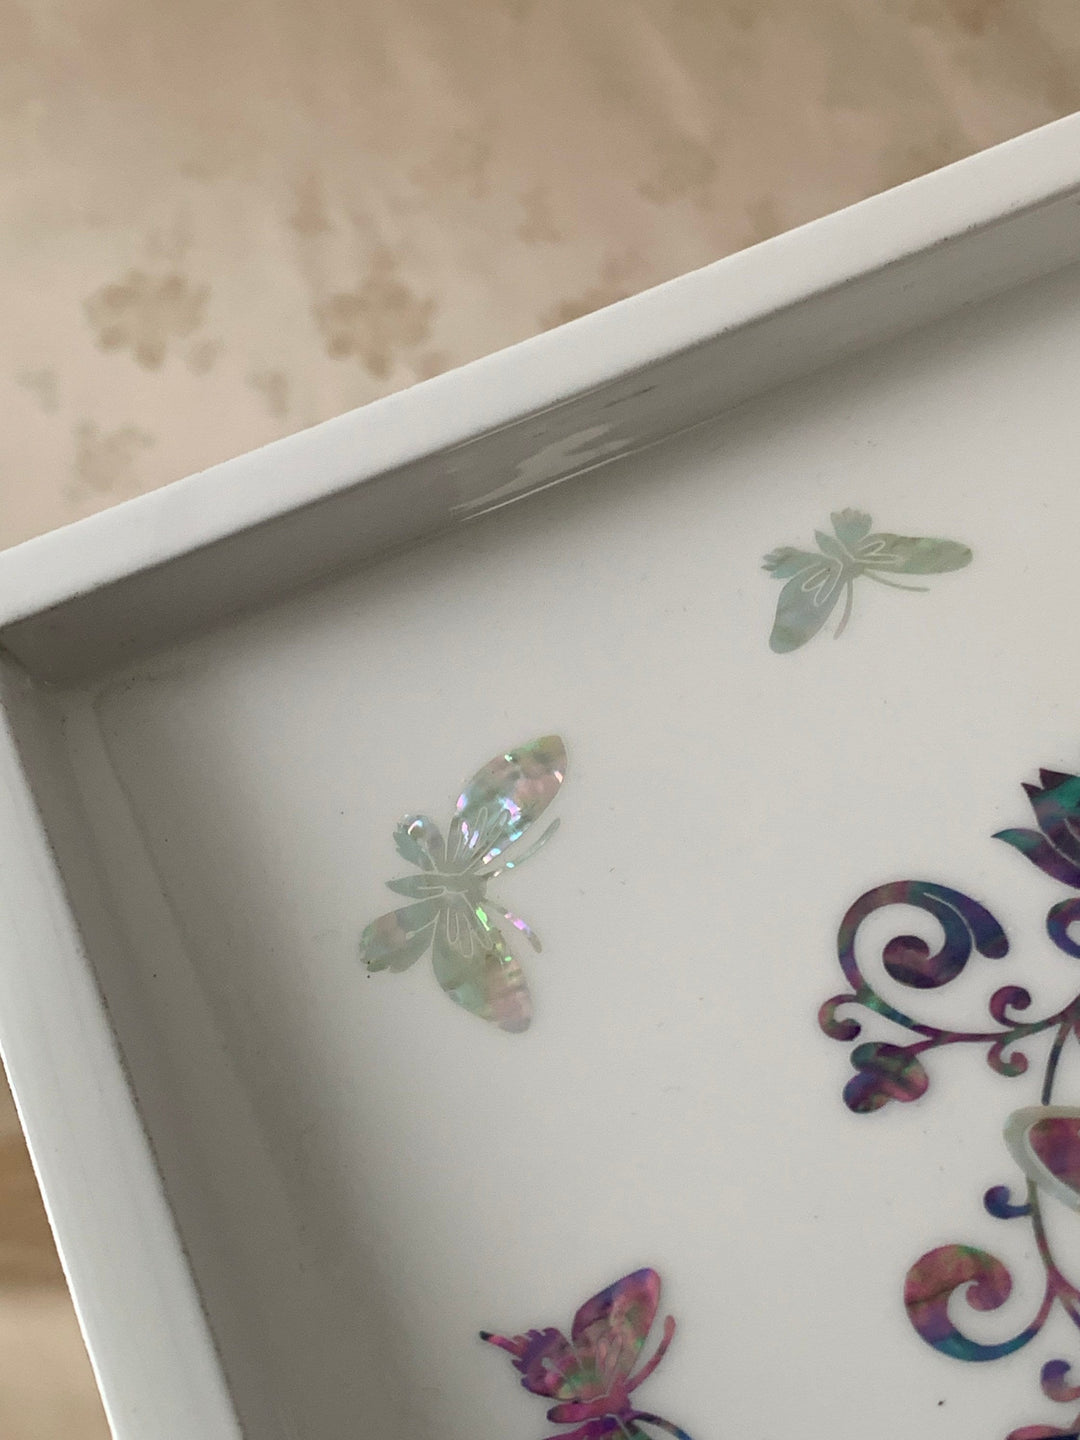 Mother of Pearl White Tray with Flower Pattern